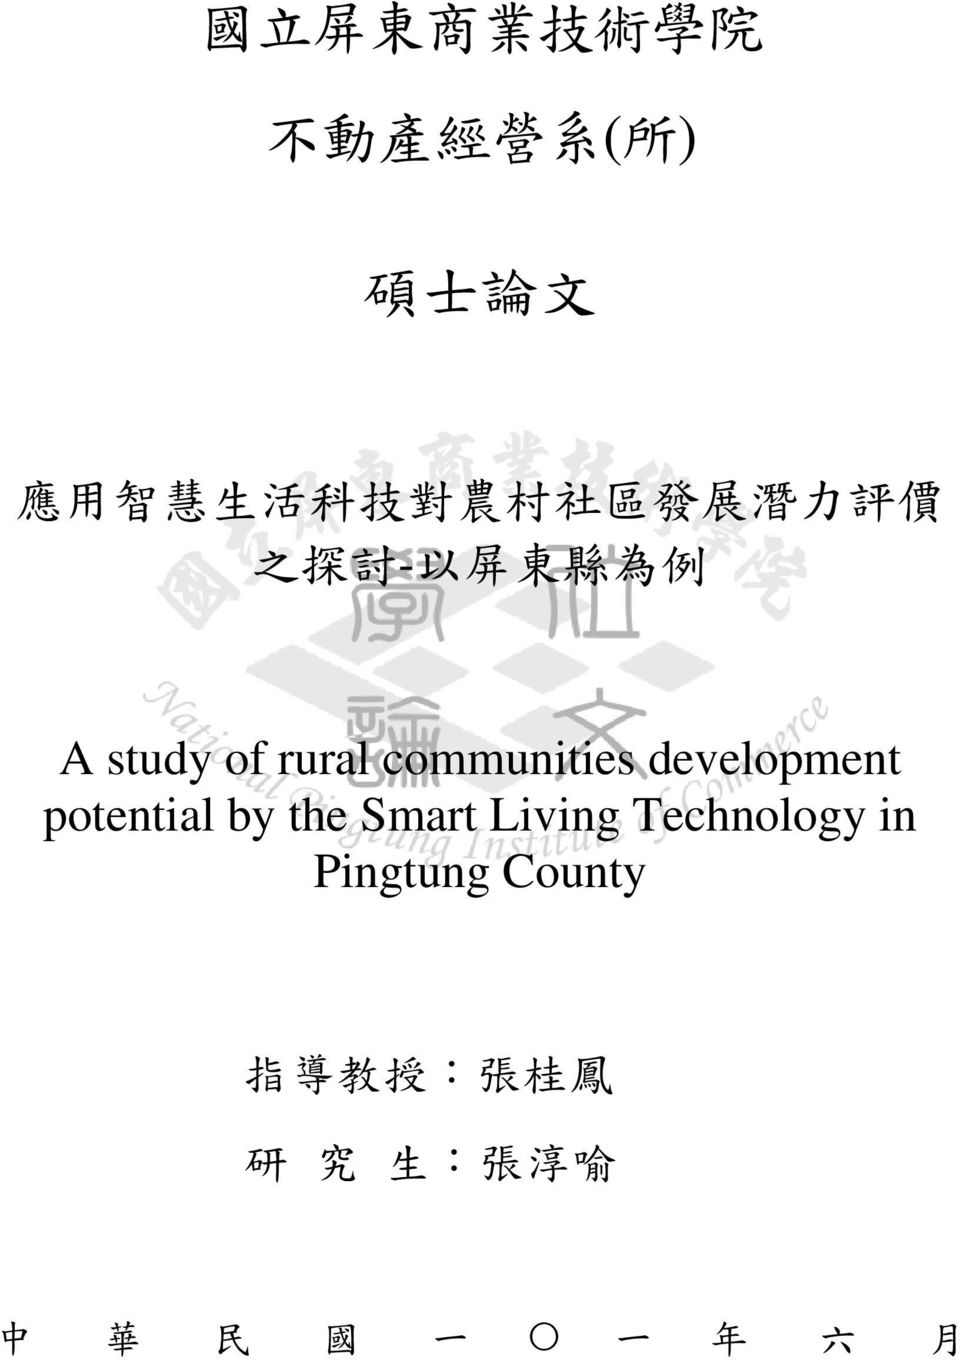 communities development potential by the Smart Living